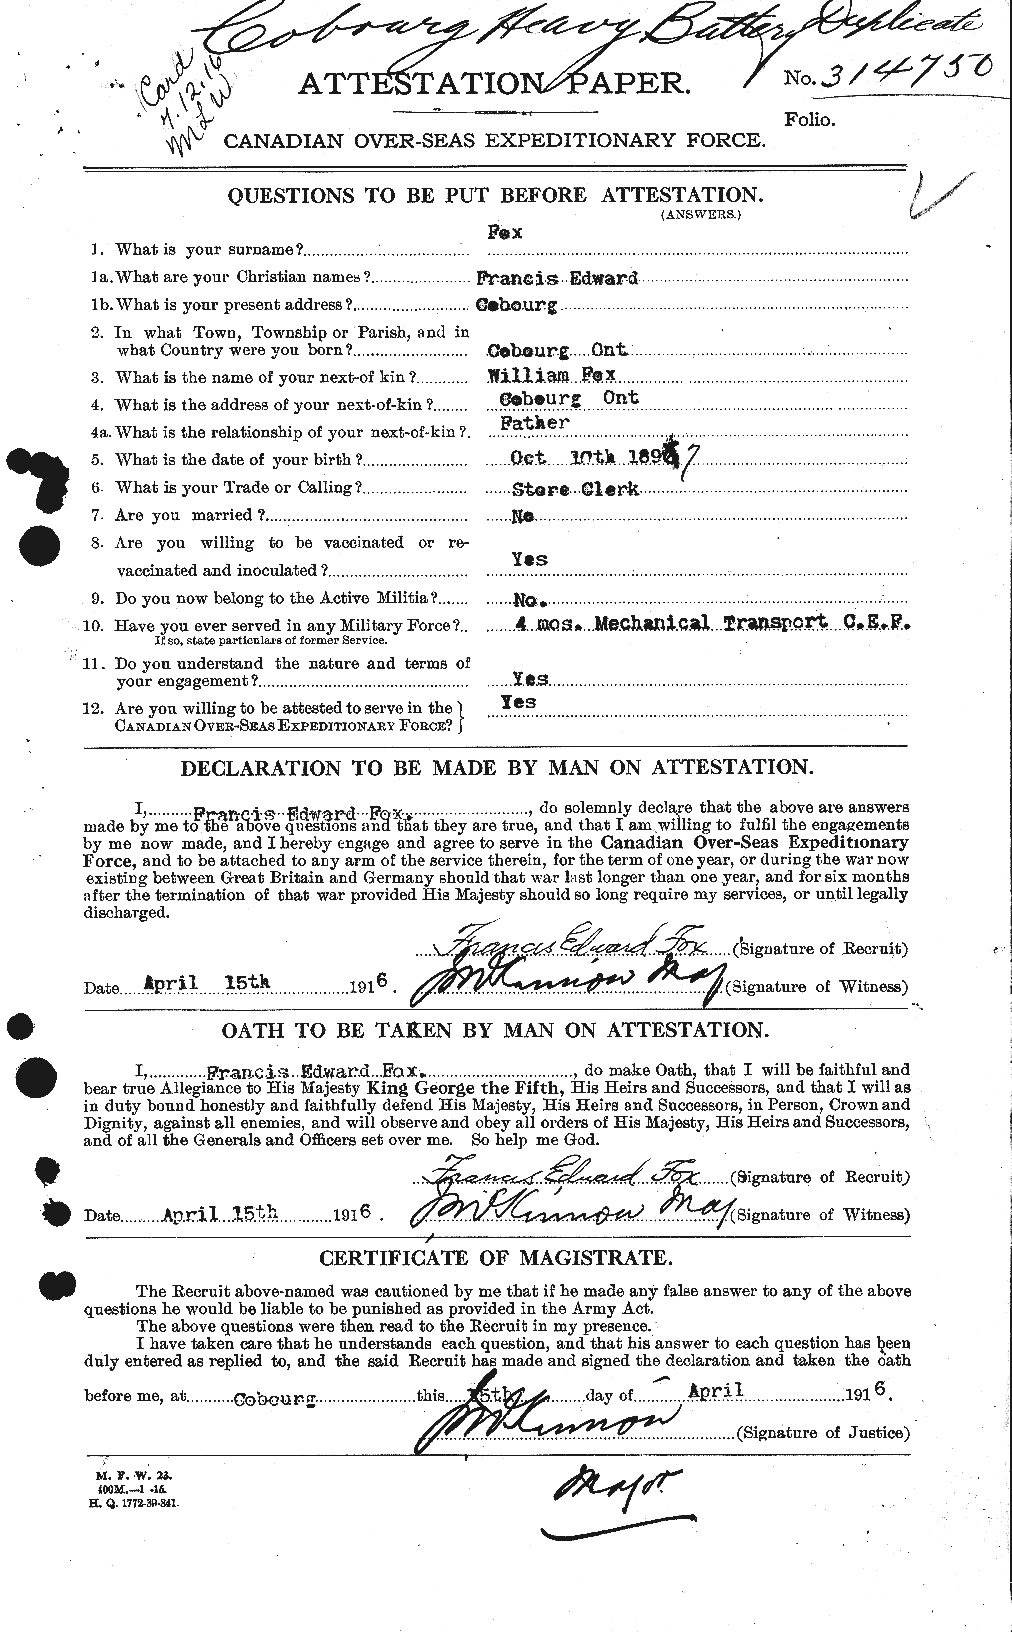 Personnel Records of the First World War - CEF 332448a